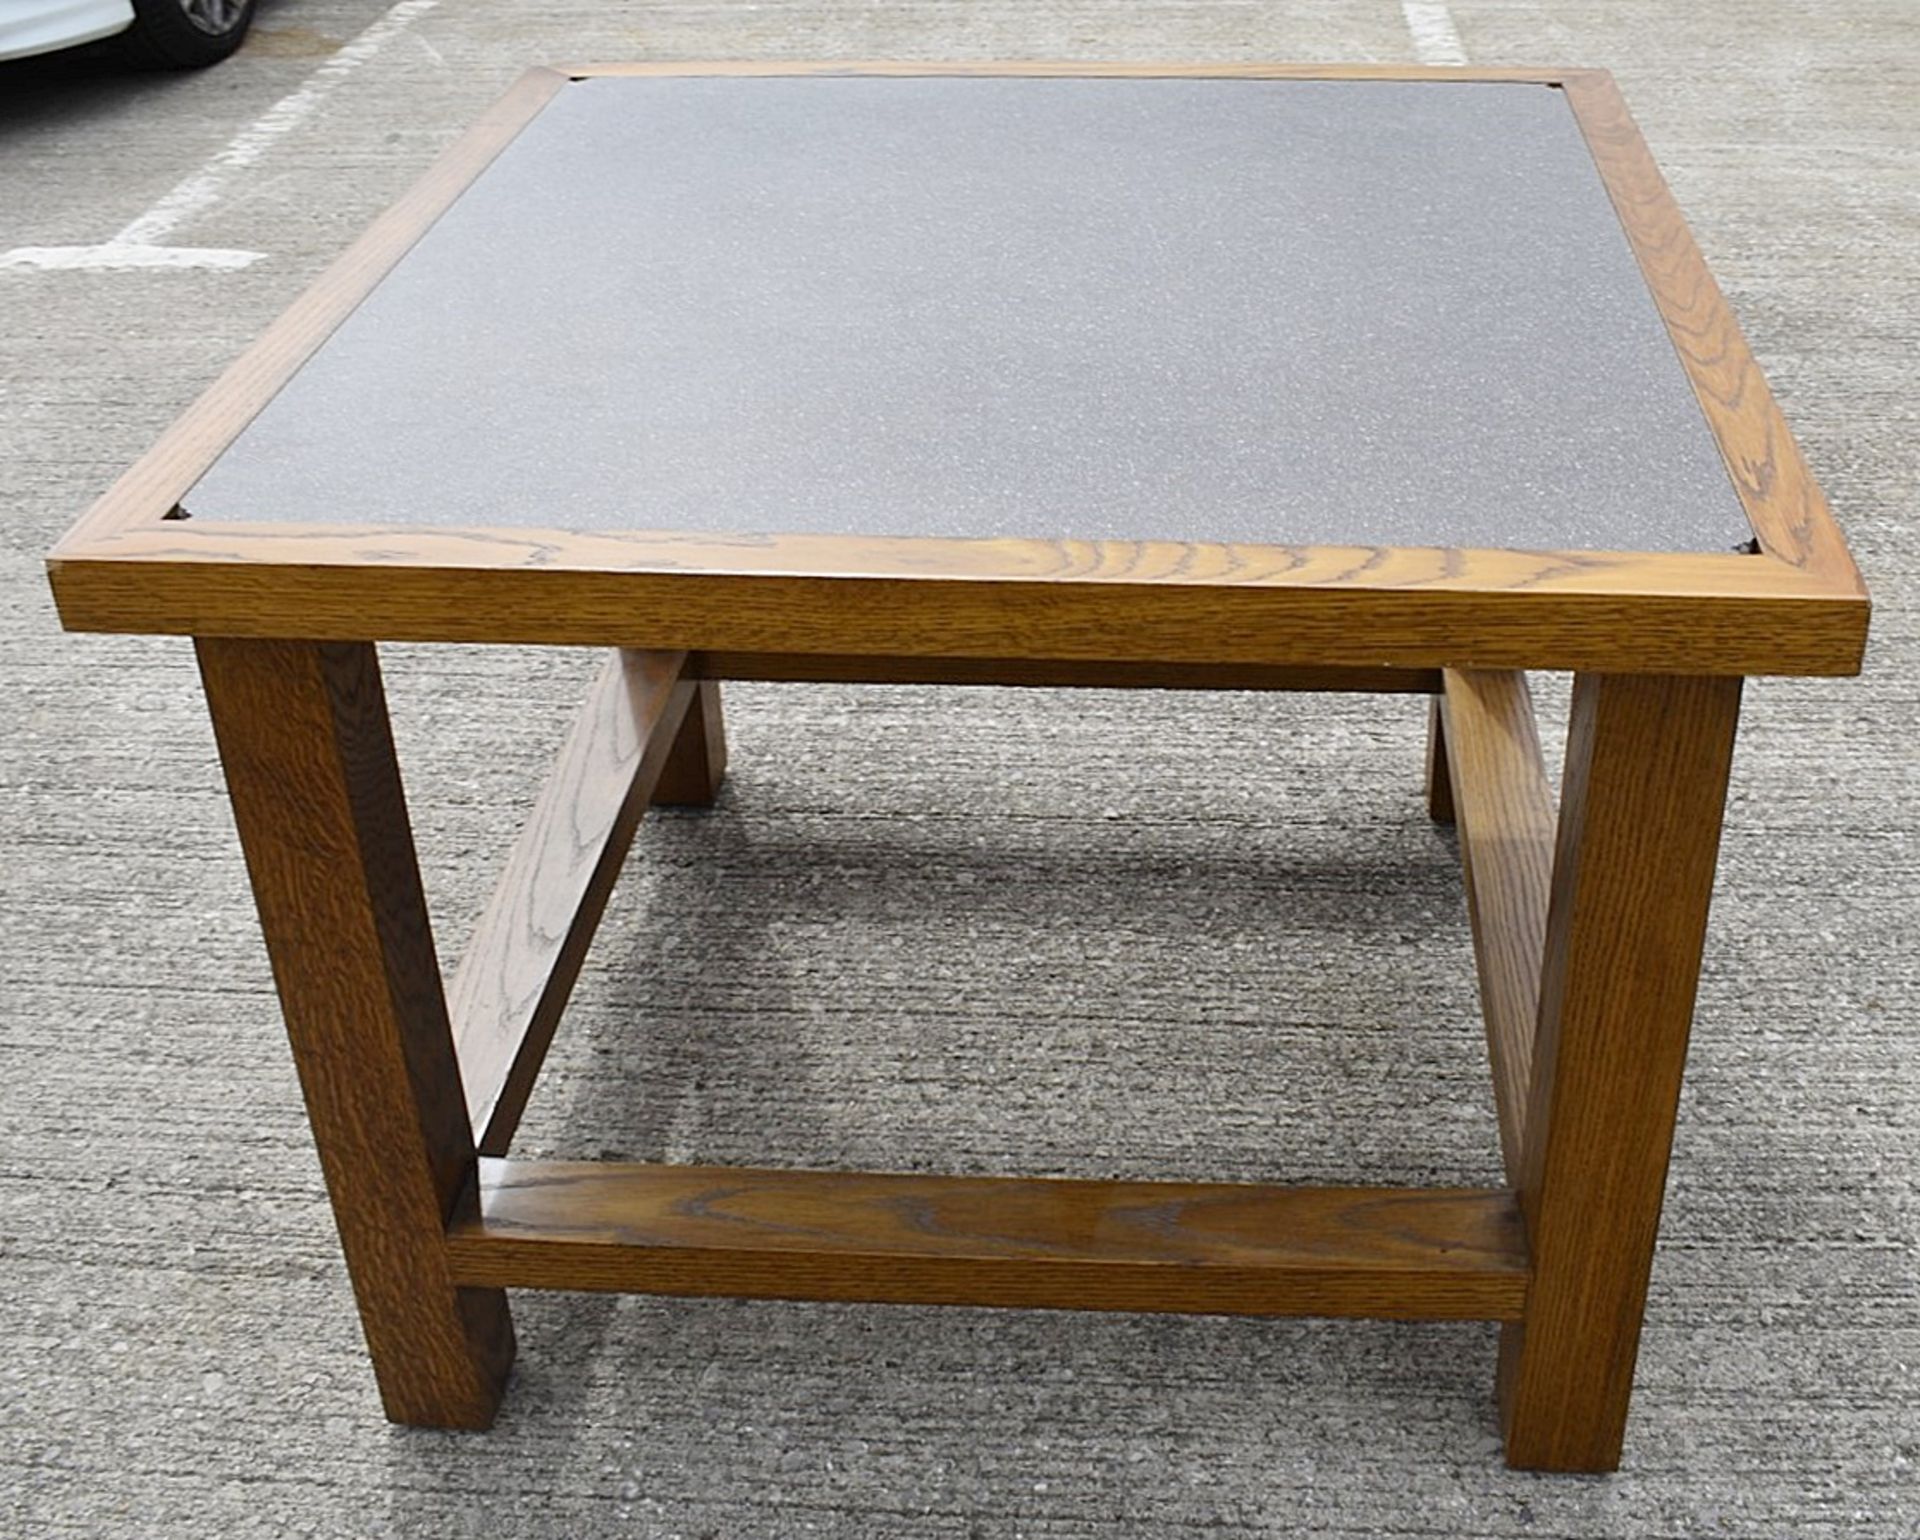 1 x Large Solid Wood Shop Retail Display Table With Stone Inlaid Top - Image 5 of 7